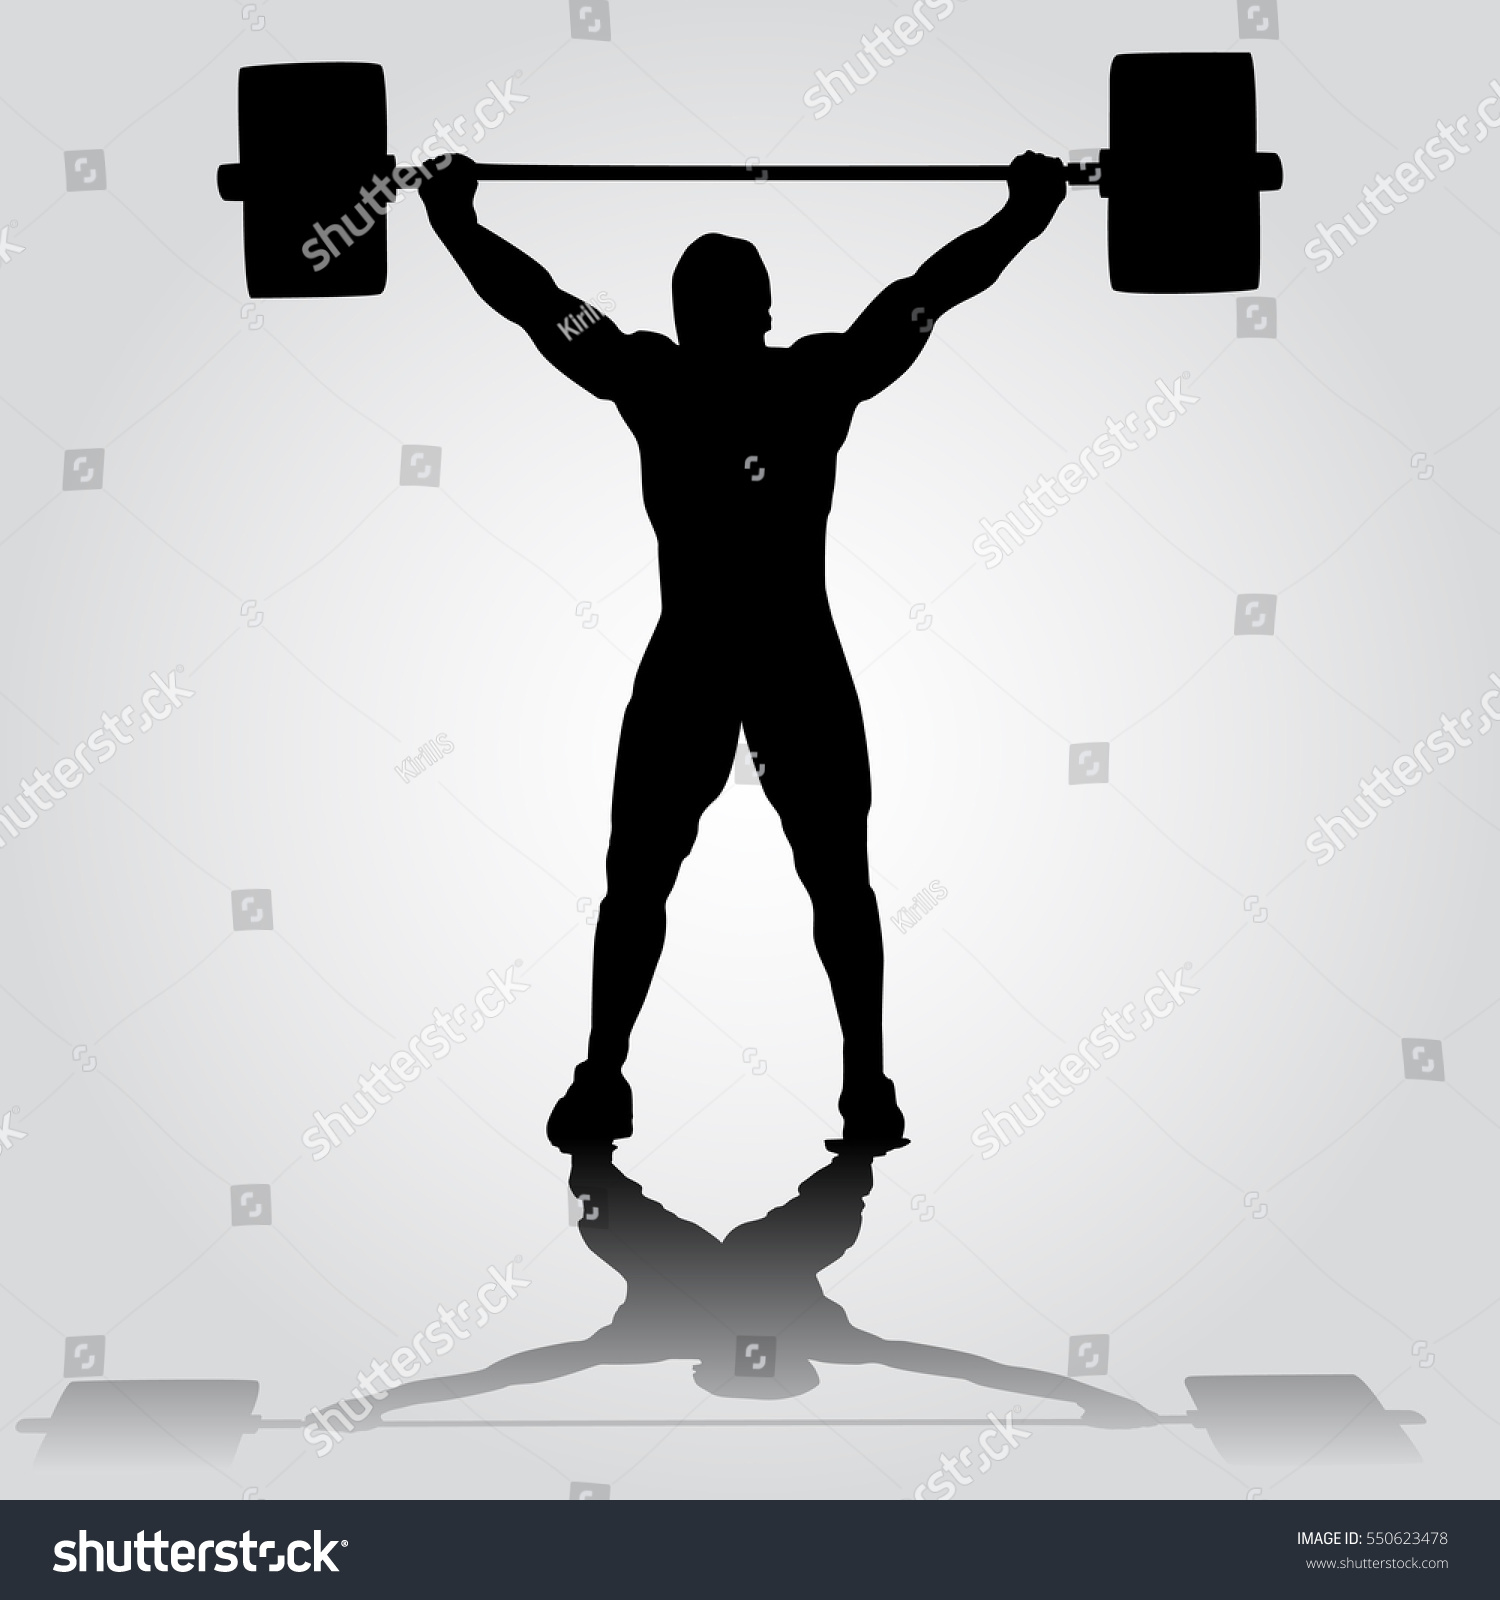 SVG of Olympic games, Tokyo 2021 silhouette of athlete is doing snatch exercise. weightlifting svg